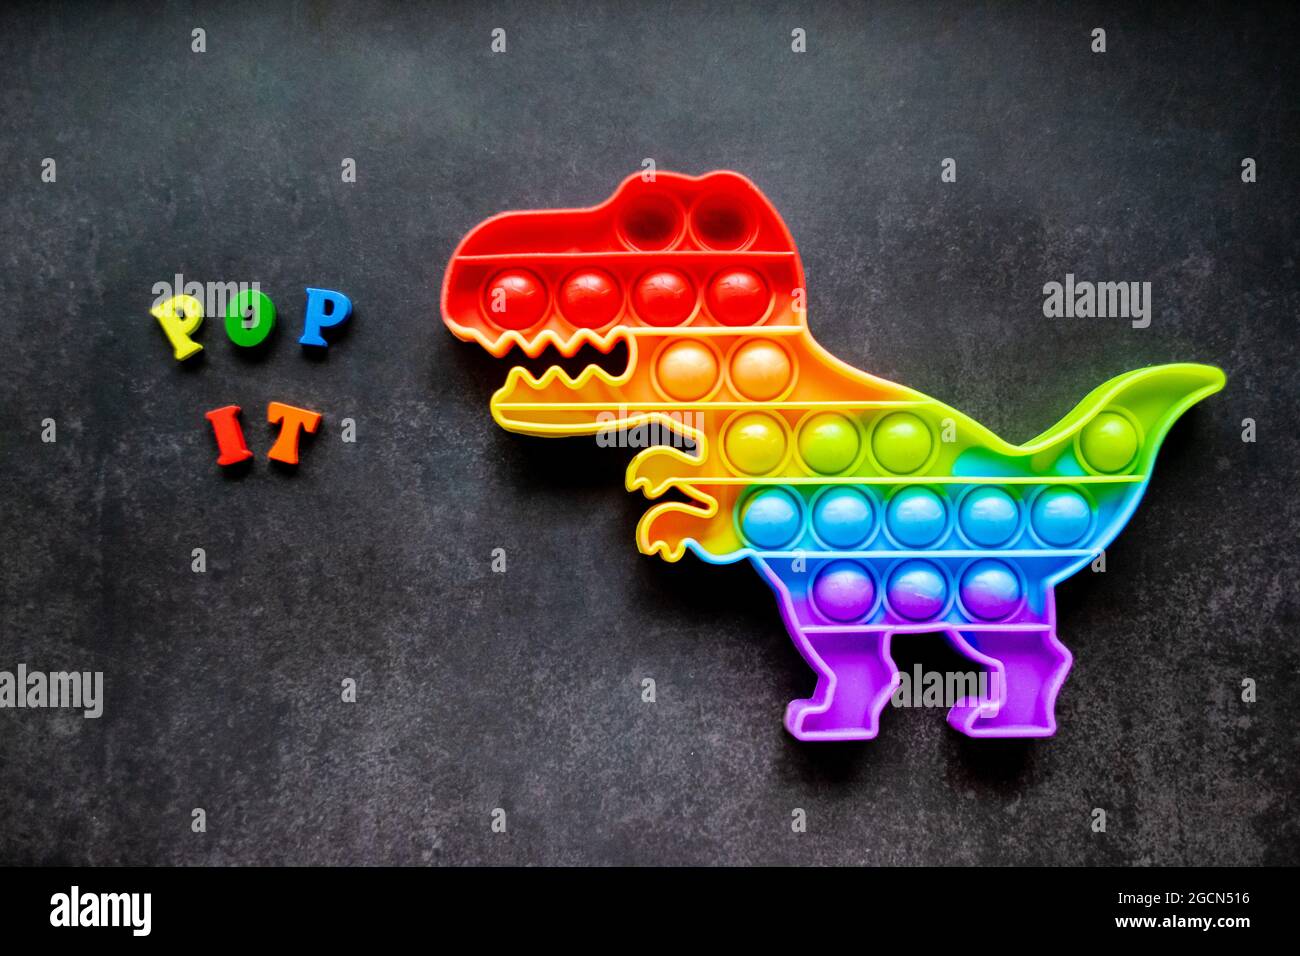 Toy pop it dinosaur rainbow colors on a black background with multicolored letters and lettering - Pop it. Stock Photo